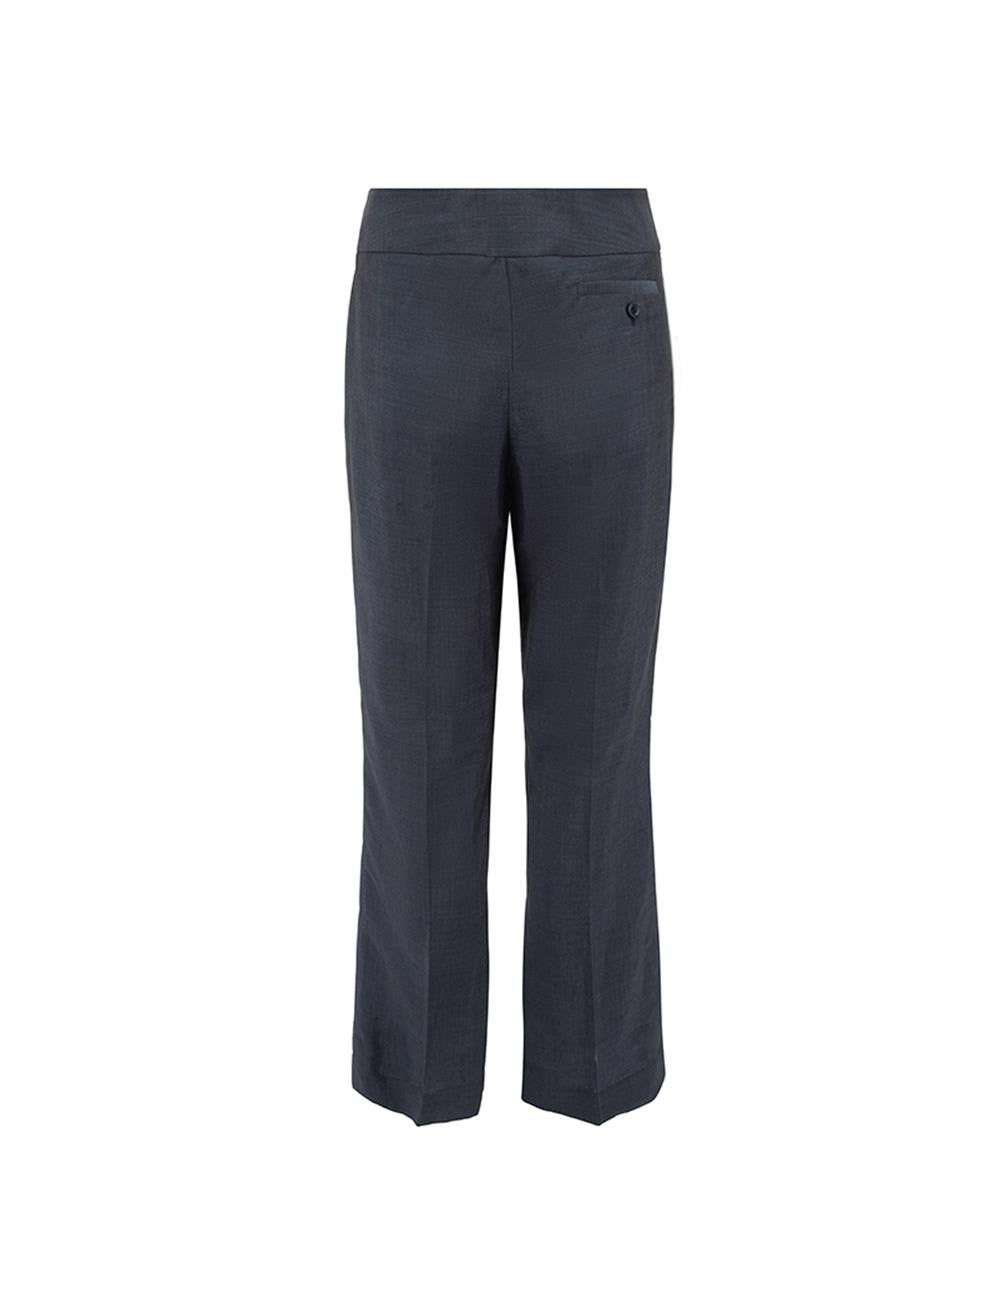 Karen Millen Women's Navy Low Rise Flared Trousers In Good Condition For Sale In London, GB